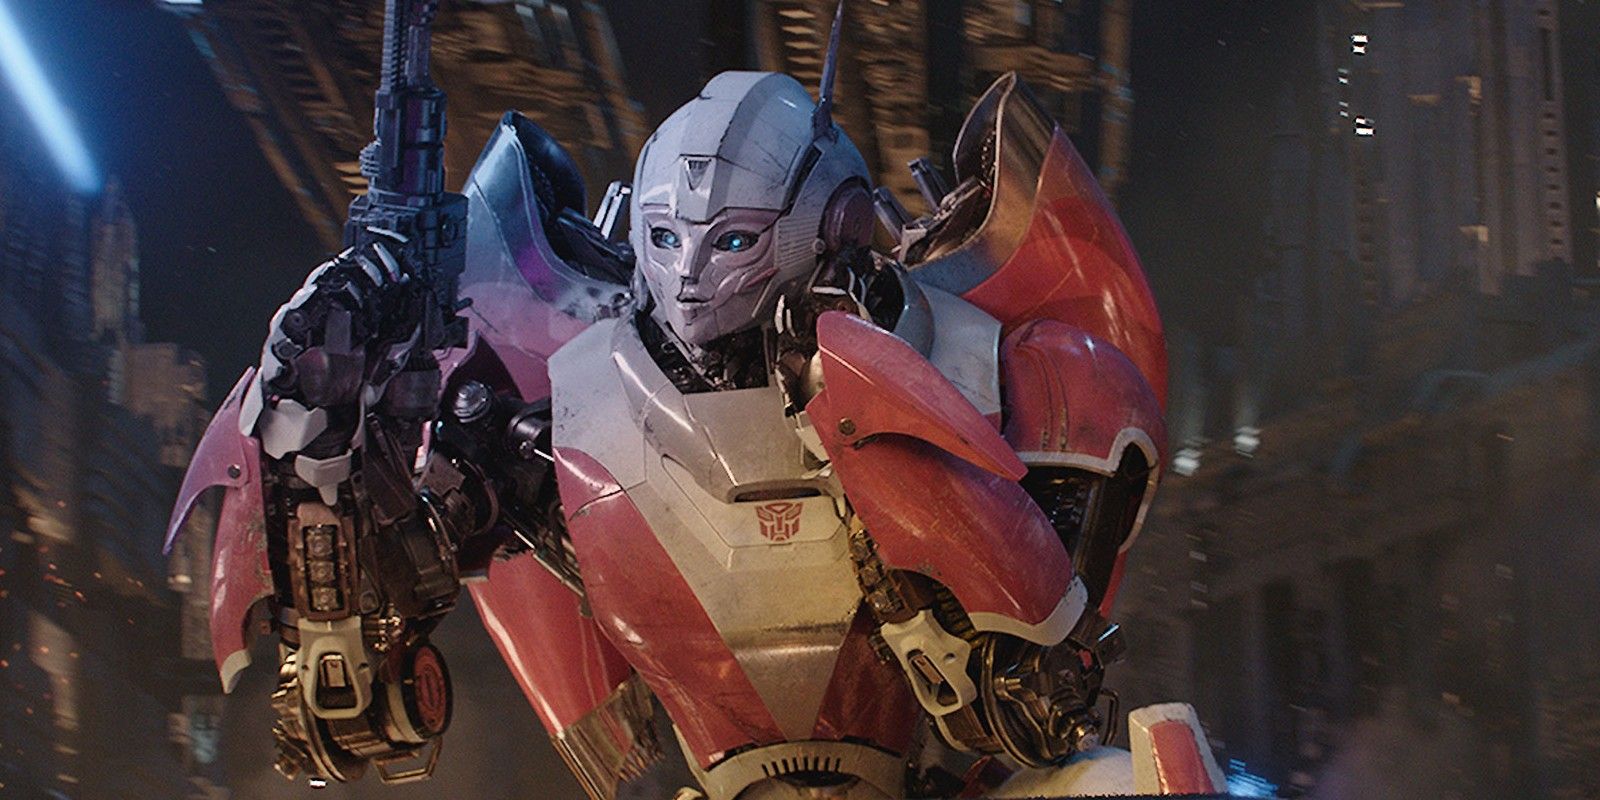 Arcee in Transformers holding a gun up.